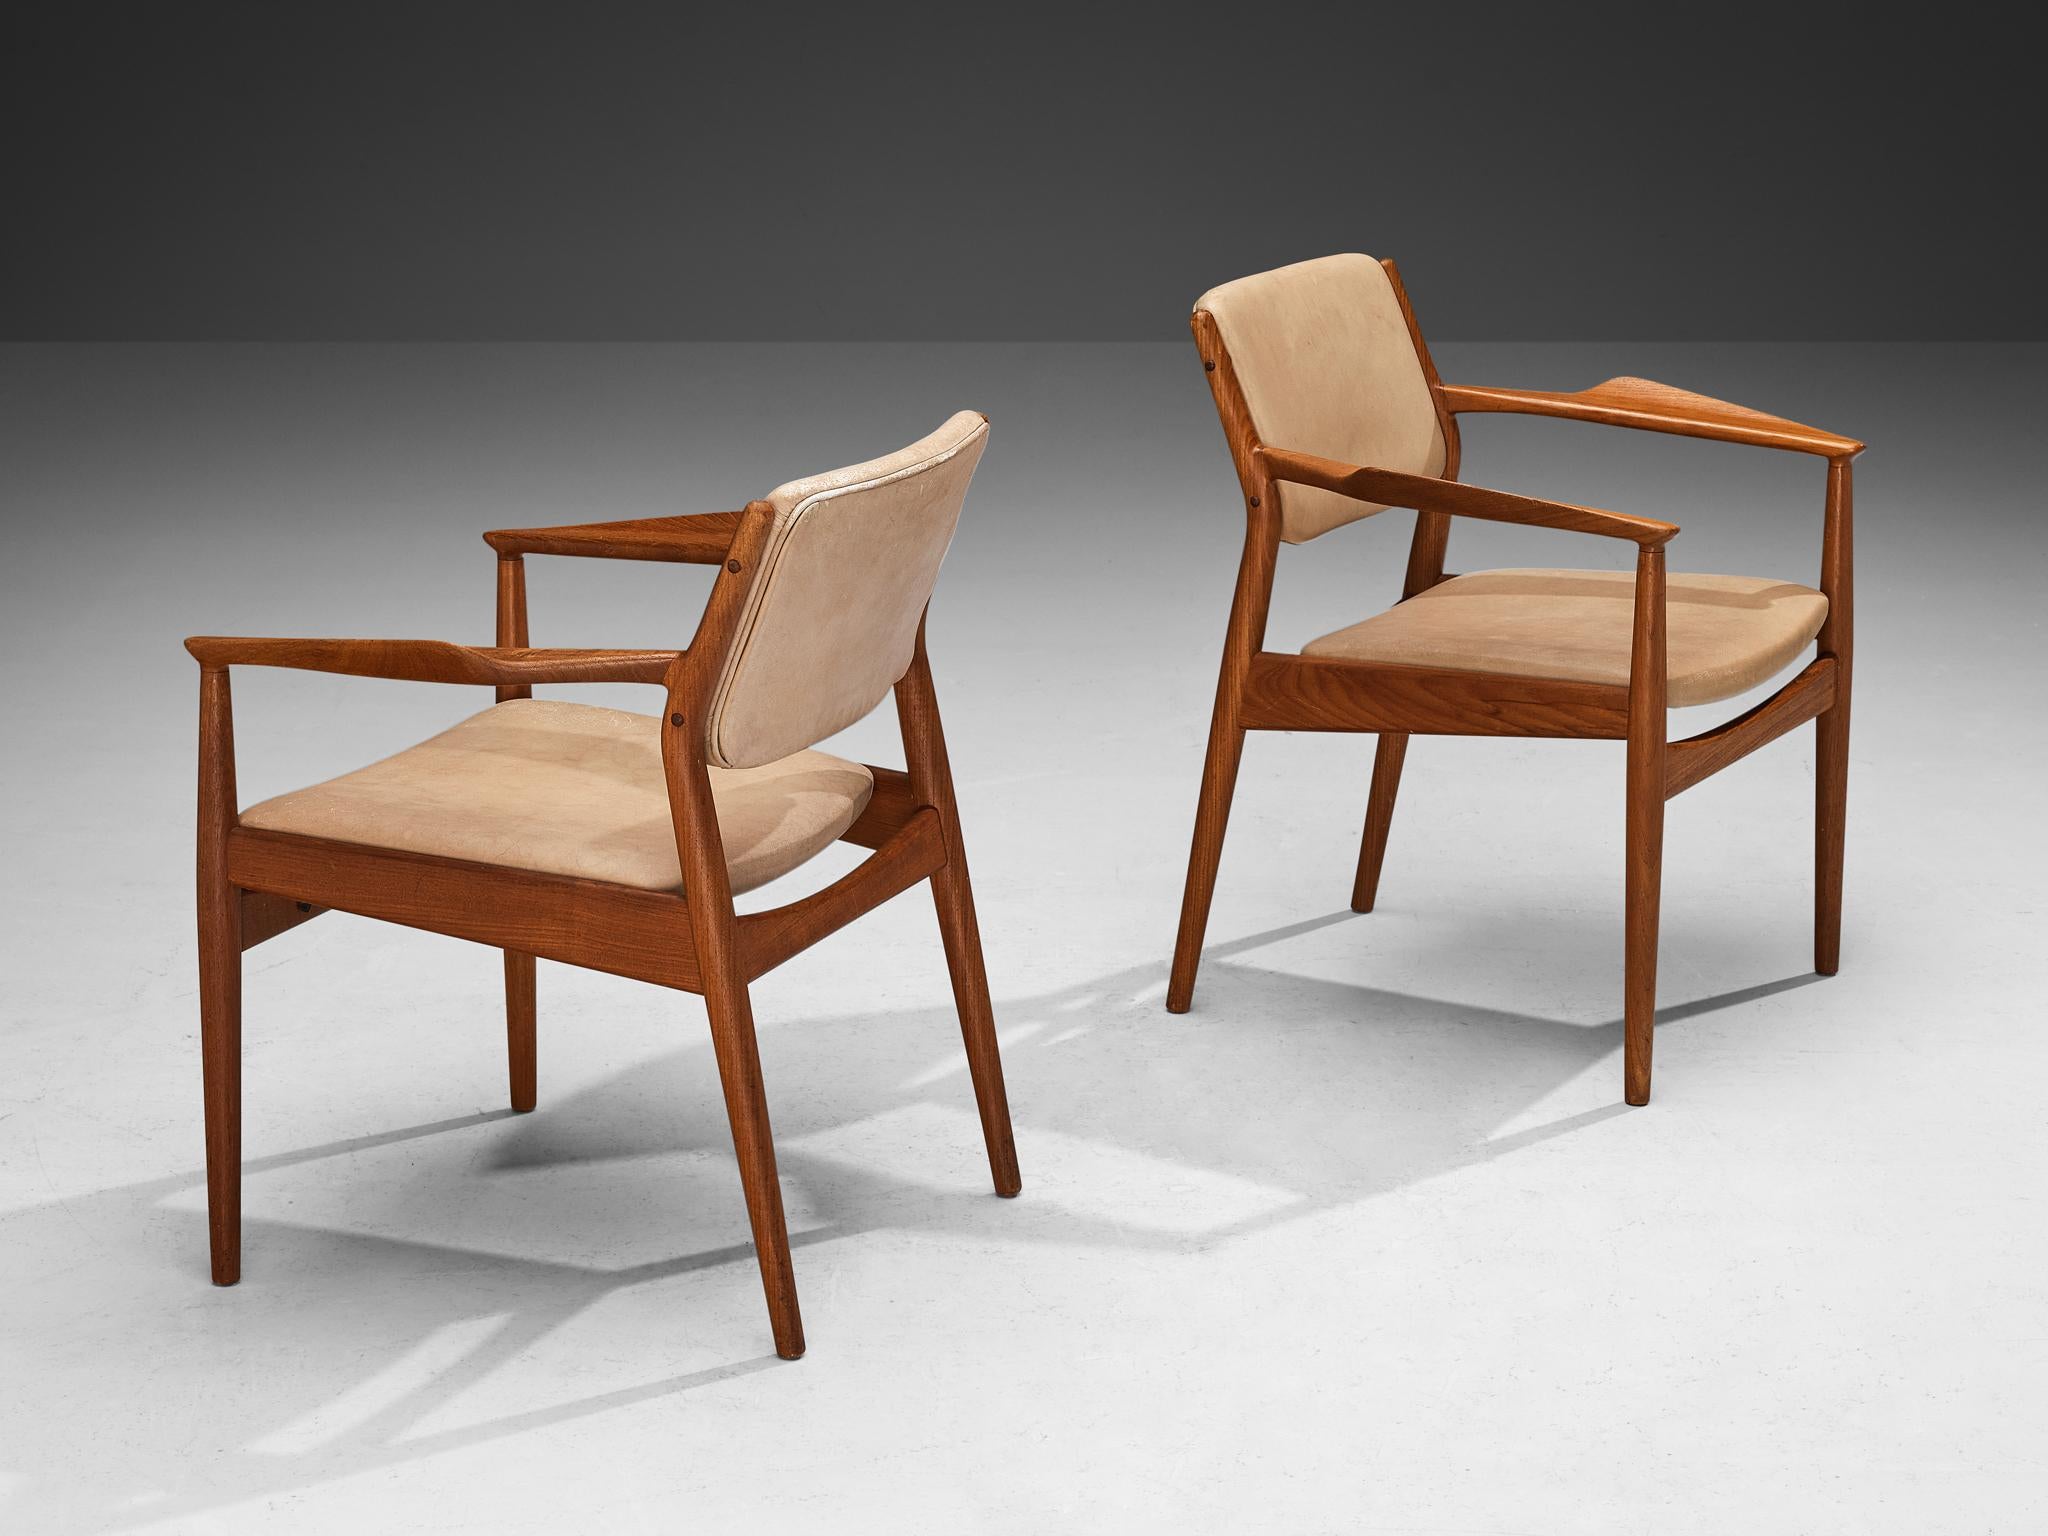 Arne Vodder for Sibast, pair of armchairs, Denmark, 1960s

A design by Arne Vodder dating back to the 1960s, crafted in Denmark. The chair embodies a simplistic and understated aesthetic, characterized by gentle curved lines and rounded details in